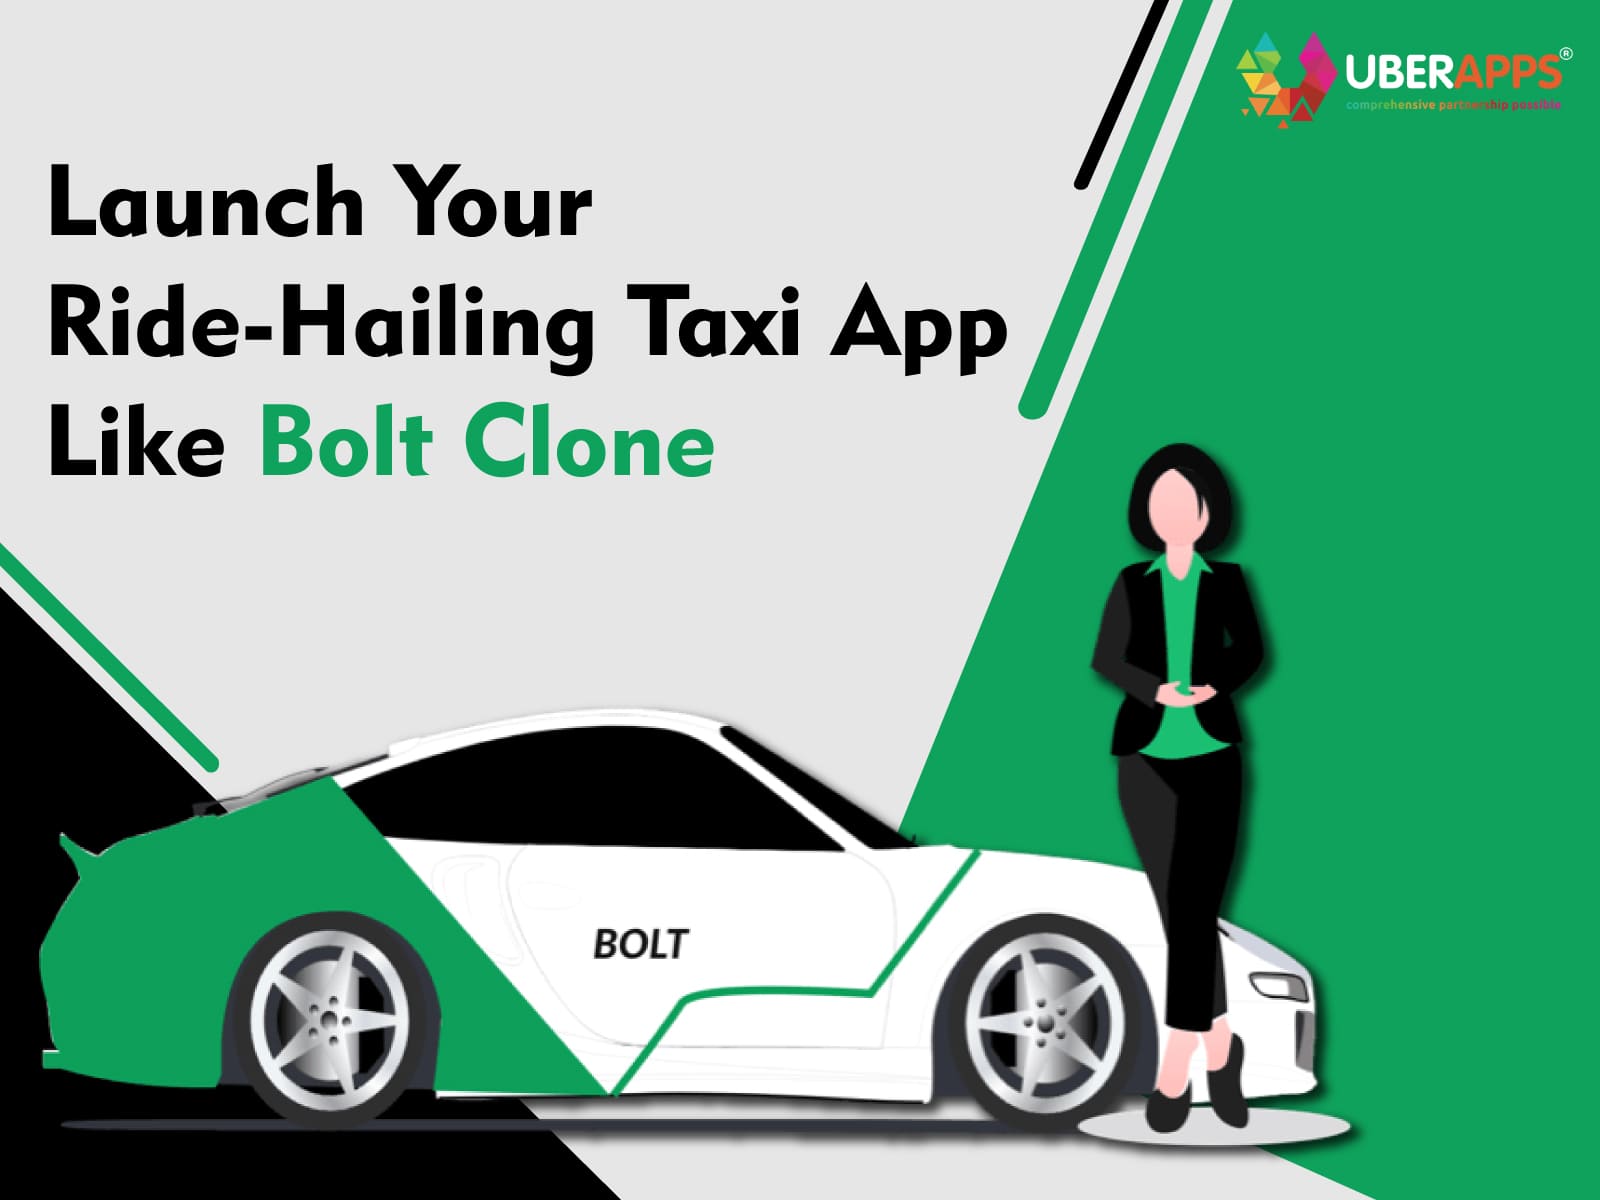 SaaS: Launch Your Ride-Hailing Taxi App Like Bolt Clone